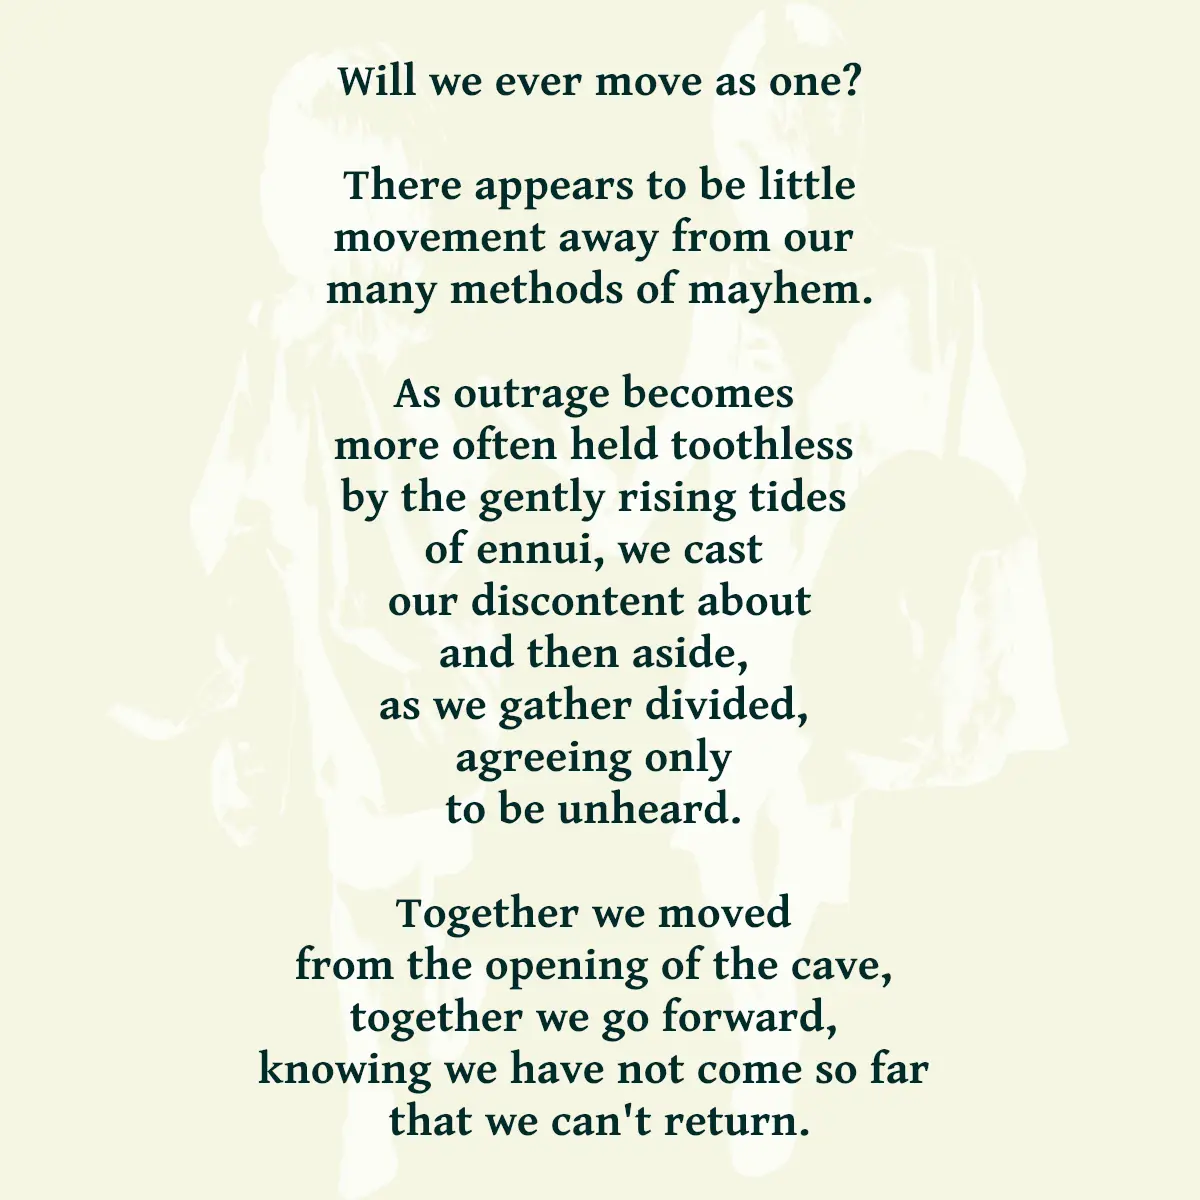 Will we ever move as one? There appears to be little movement away from our many methods of mayhem. As outrage becomes more often held toothless by the gently rising tides of ennui, we cast our discontent about and then aside, as we gather divided, agreeing only to be unheard. Together we moved from the opening of the cave, together we go forward, knowing we have not come so far that we can't return.